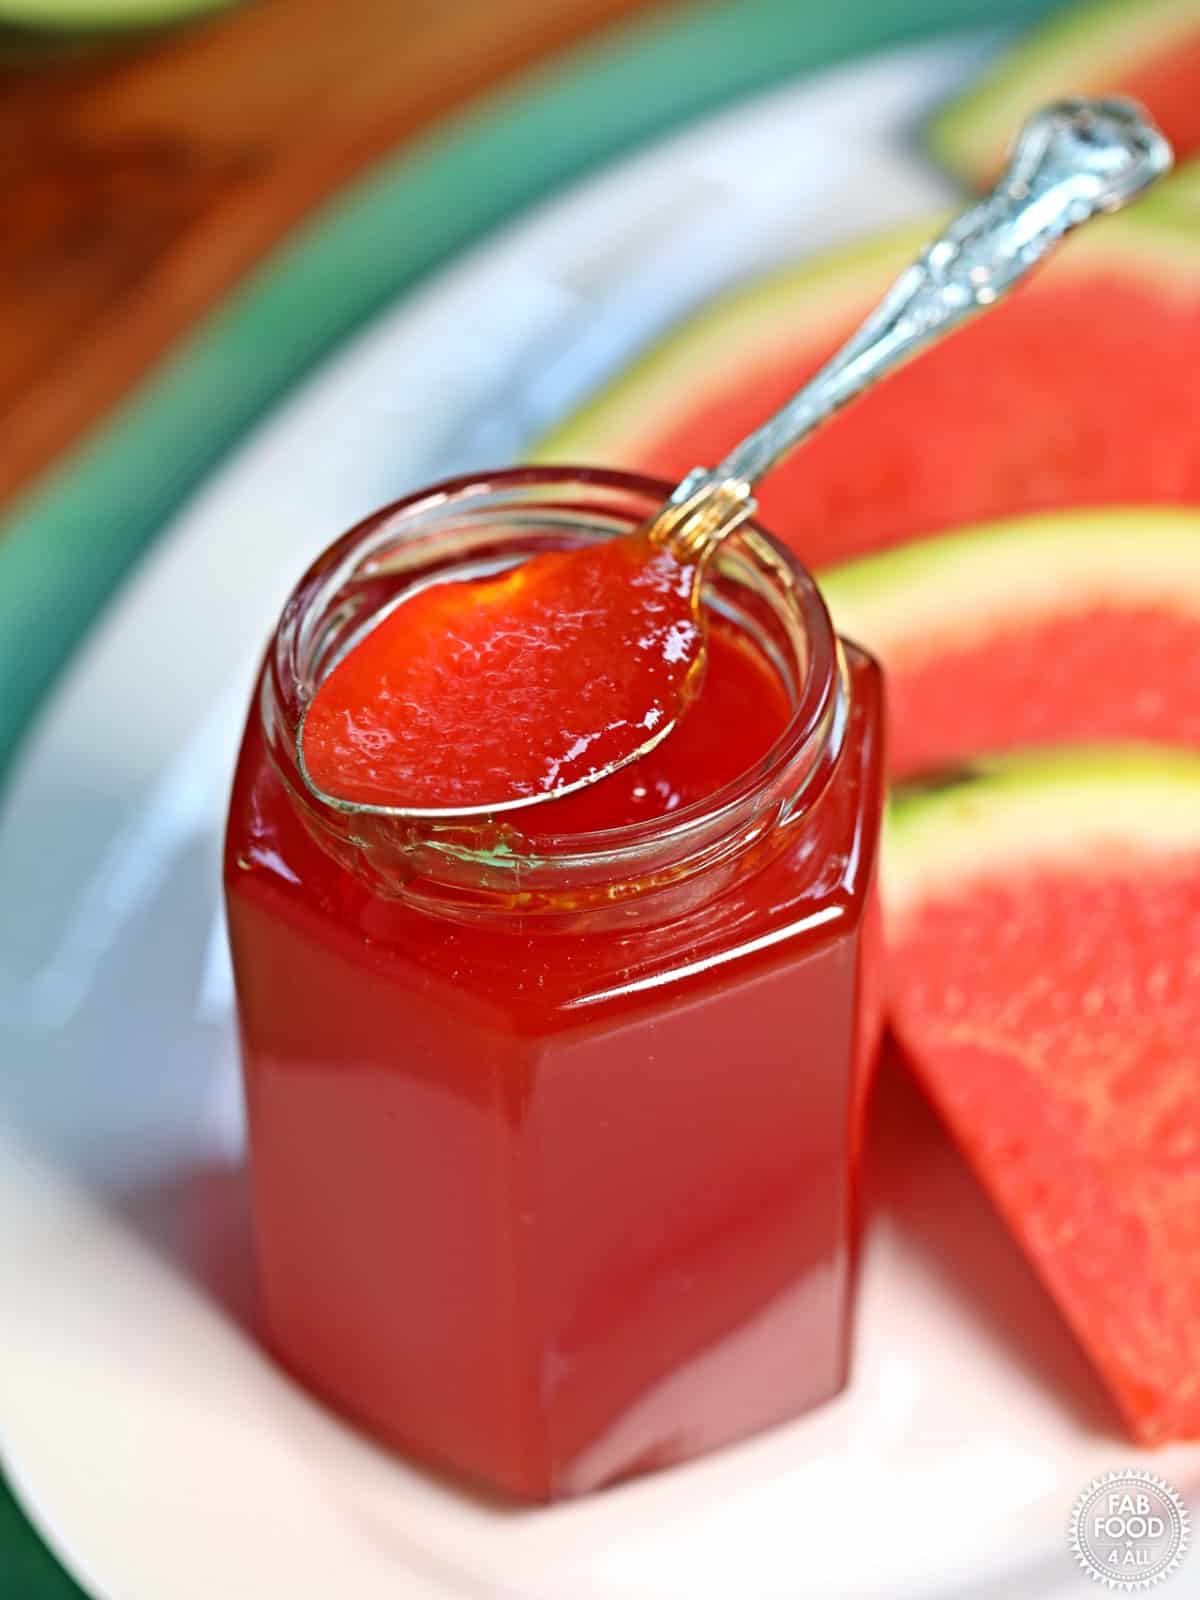 A spoonful of watermelon jam from a glass jar.